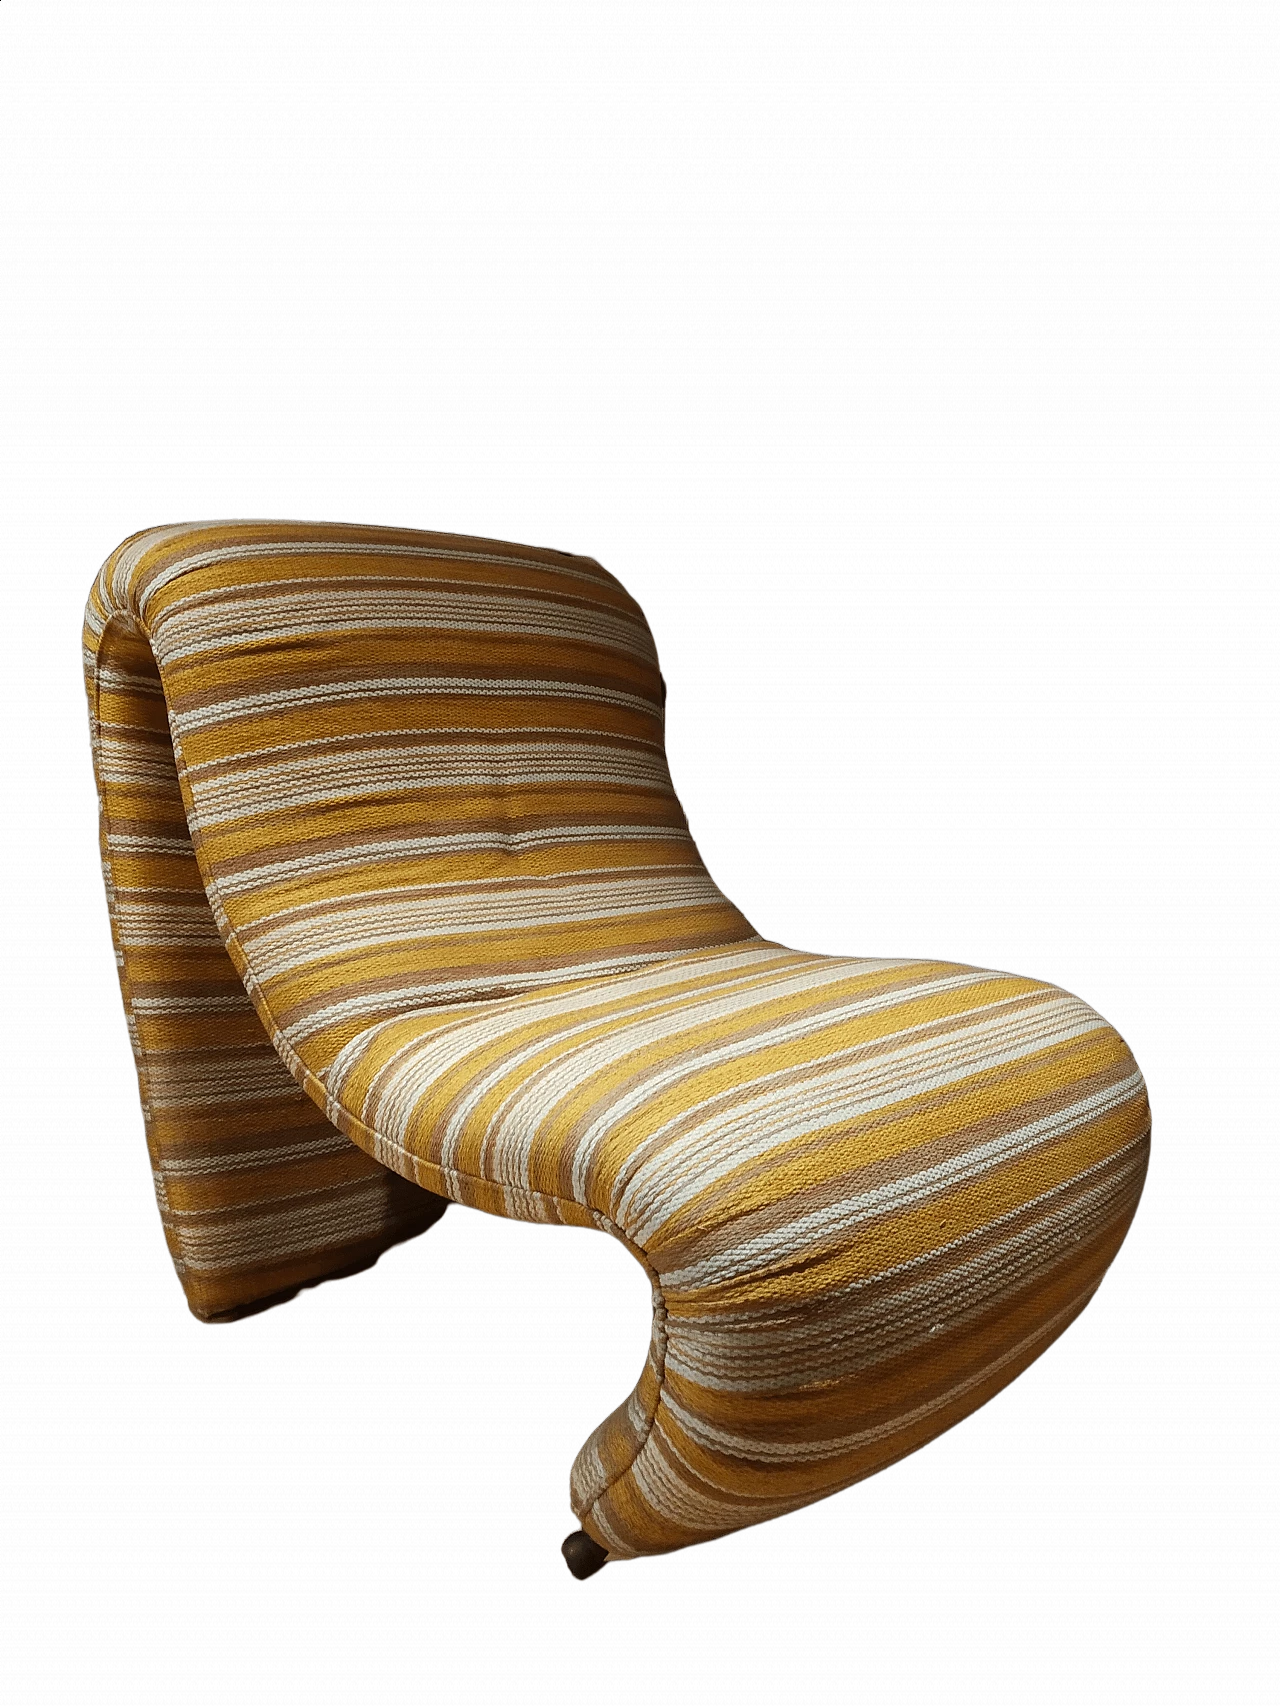 Bruco armchair upholstered in fabric, 1960s 1469922